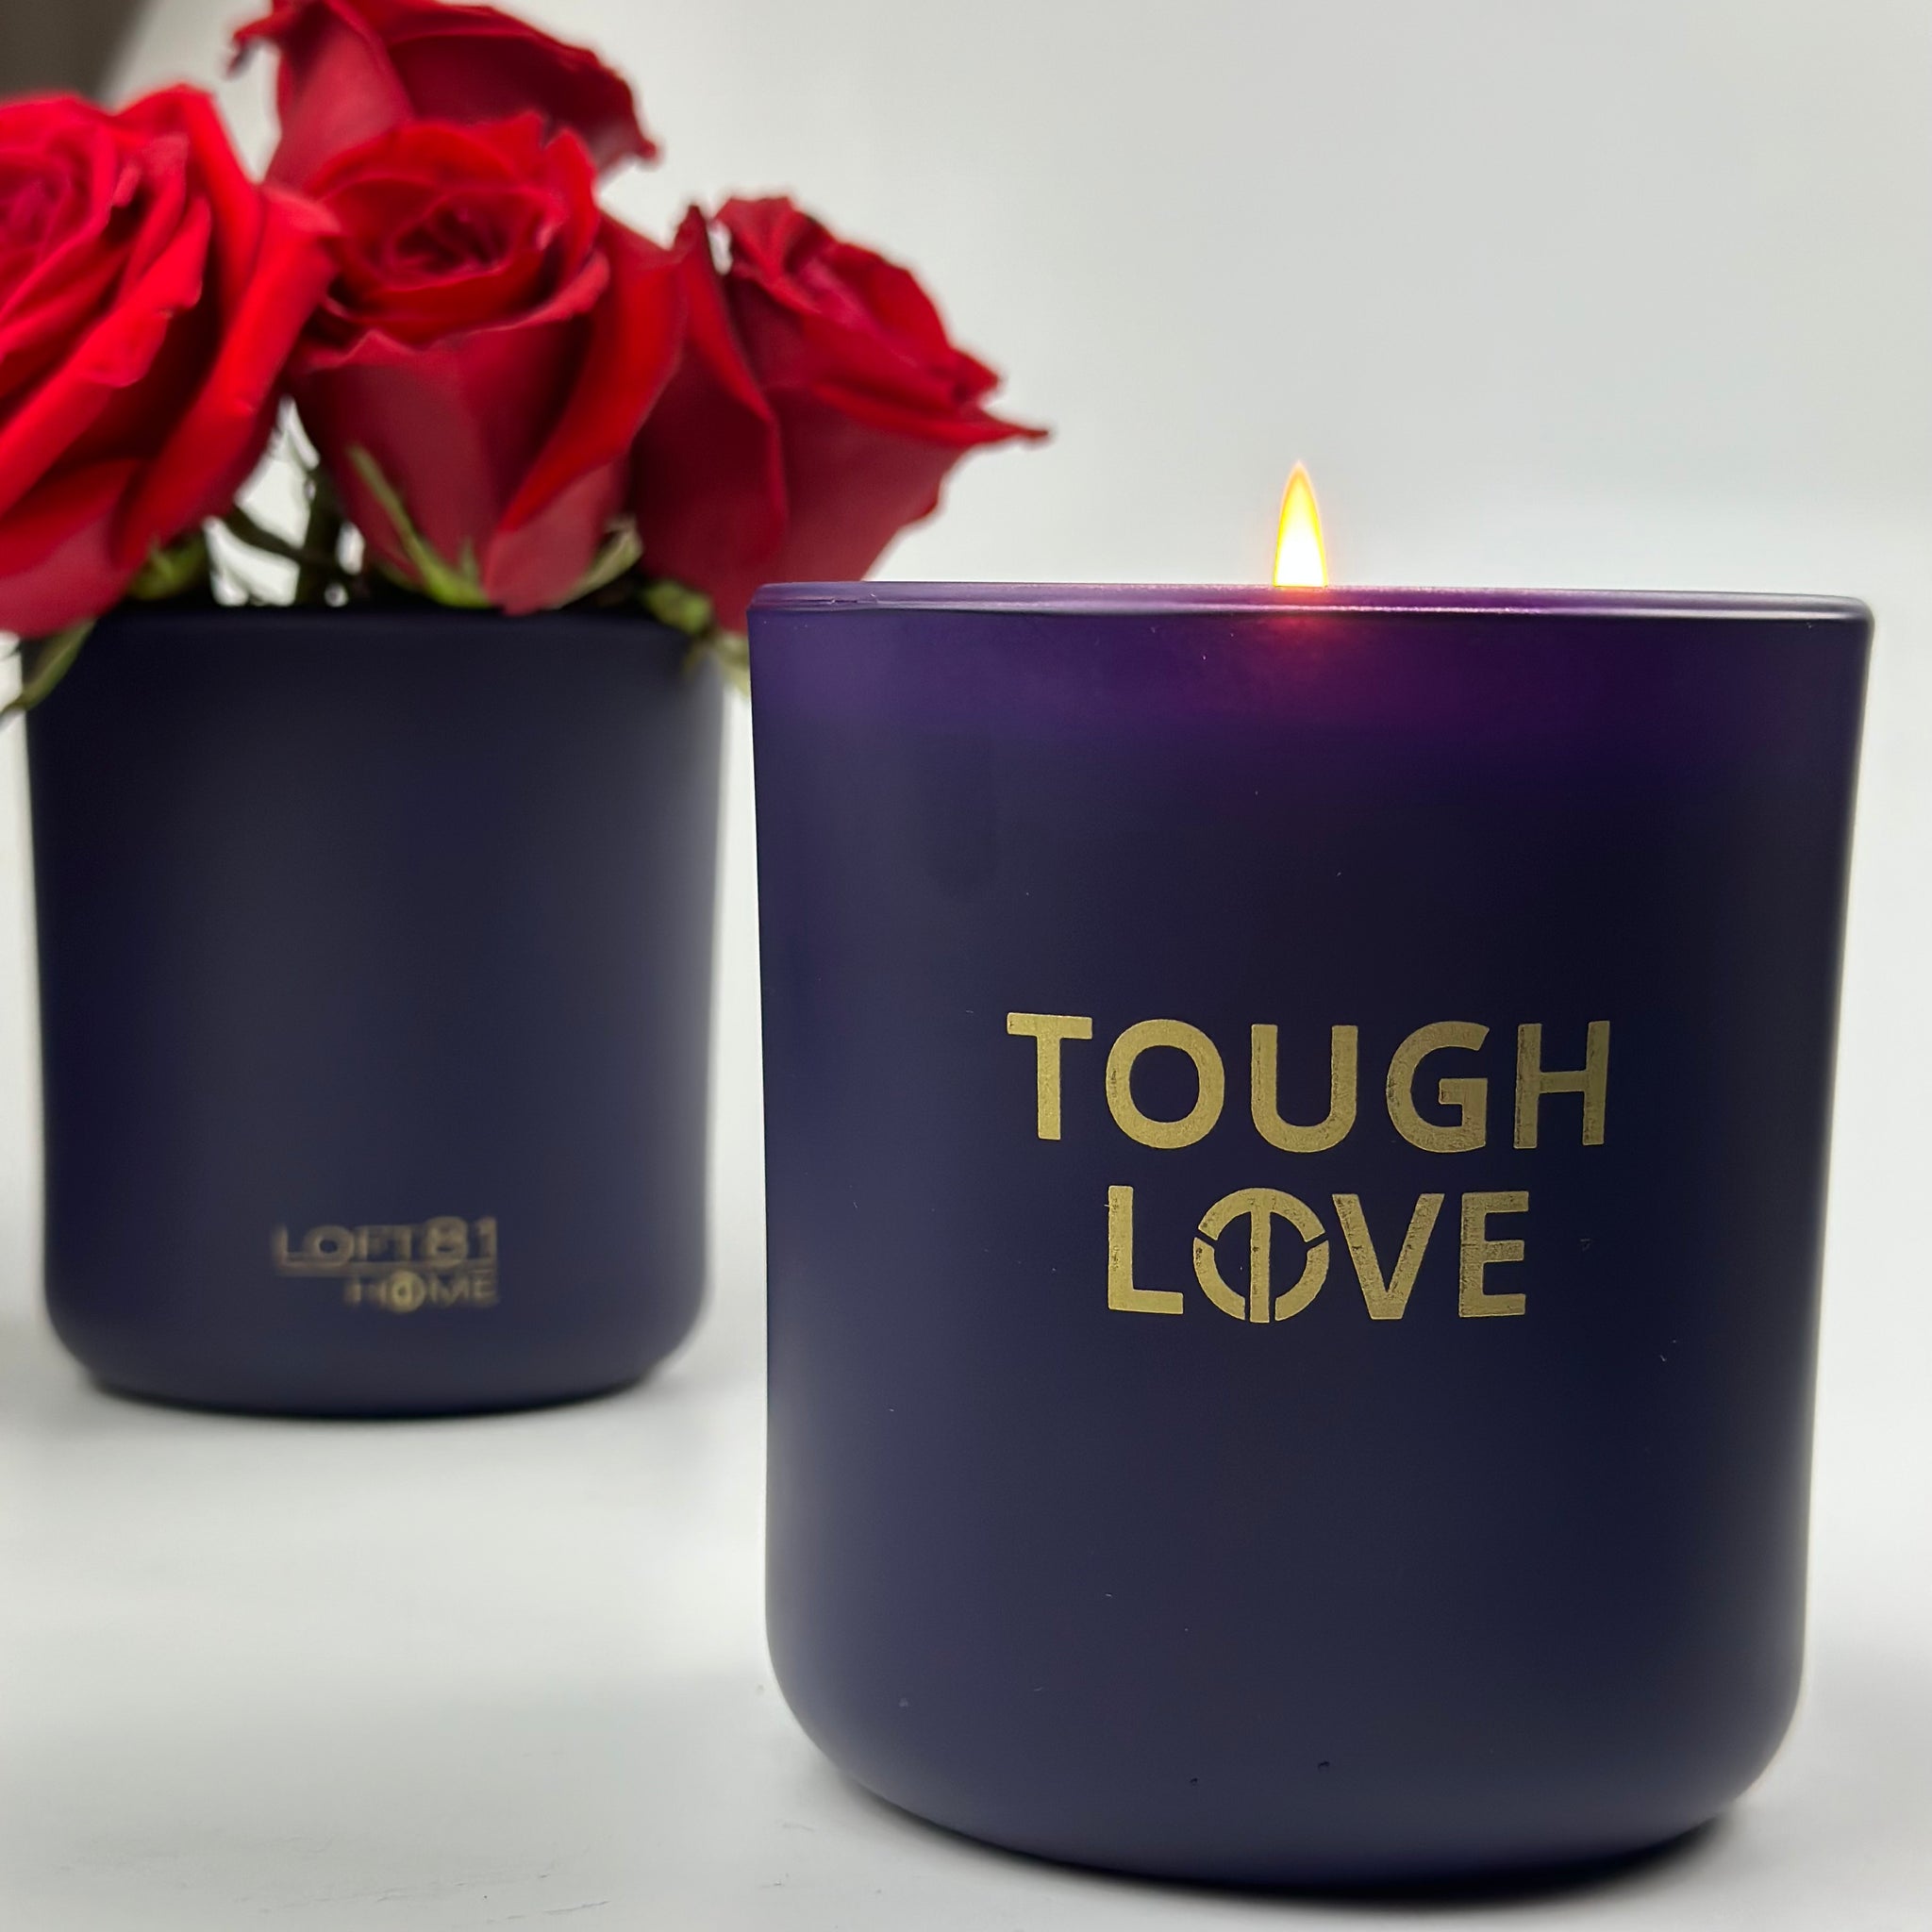 TOUGH LOVE Scented Intention Candle by Loft81 Home and Terrell Owens